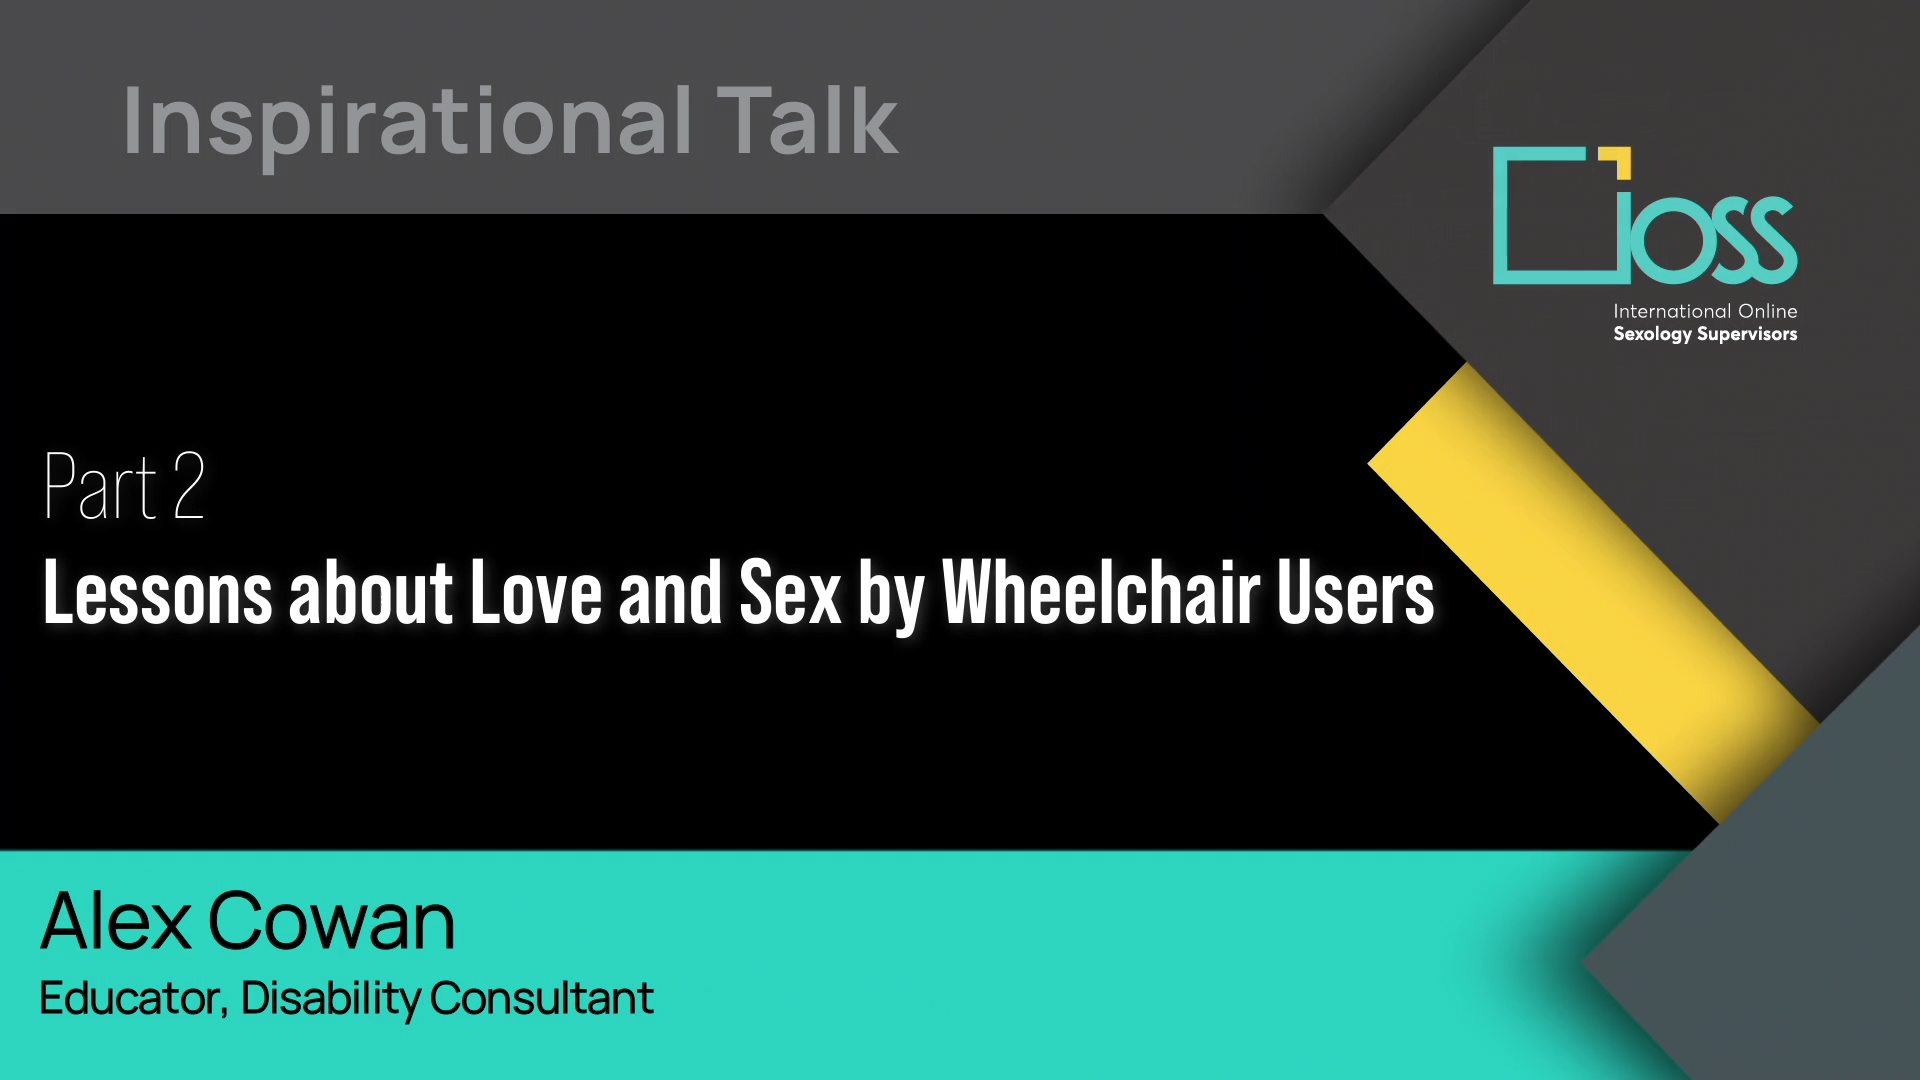 Part 2 Lessons about Love and Sex by Wheelchair Users (Part 1 & 2)